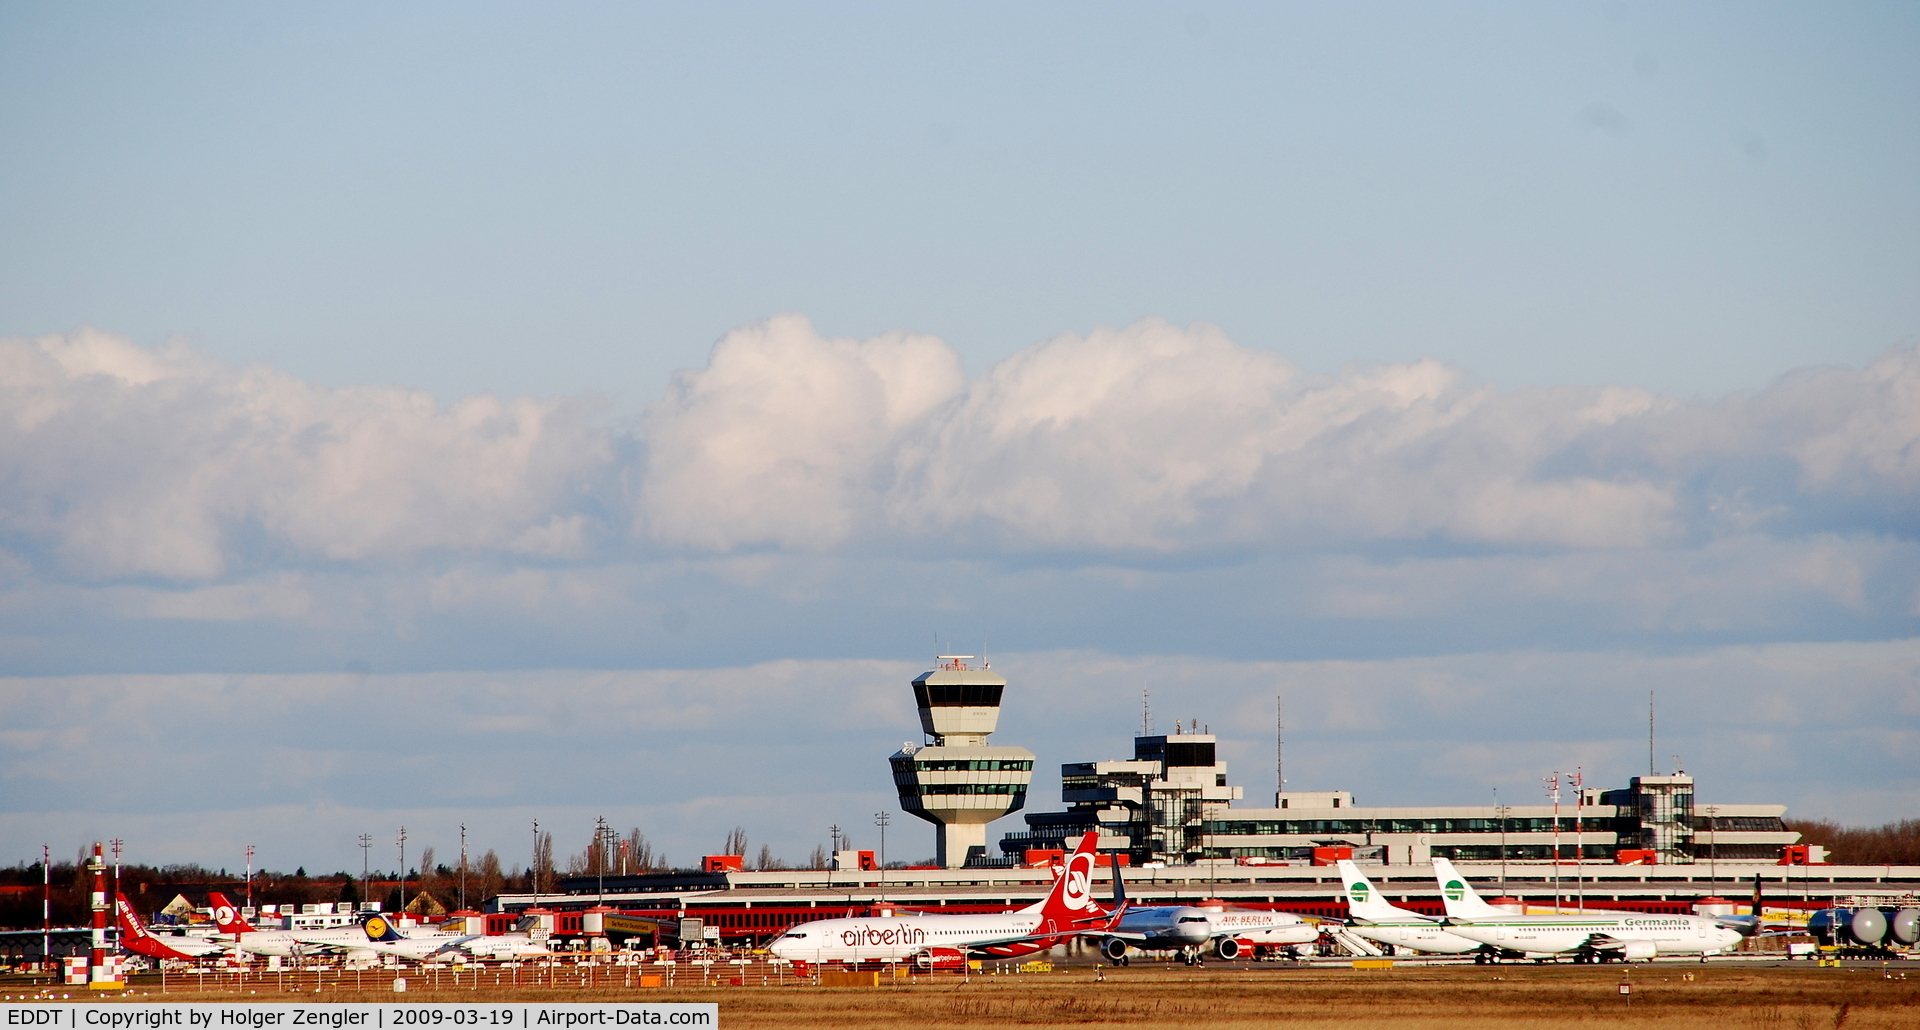 Tegel International Airport (closing in 2011), Berlin Germany (EDDT) - View to the busy parts of TXL